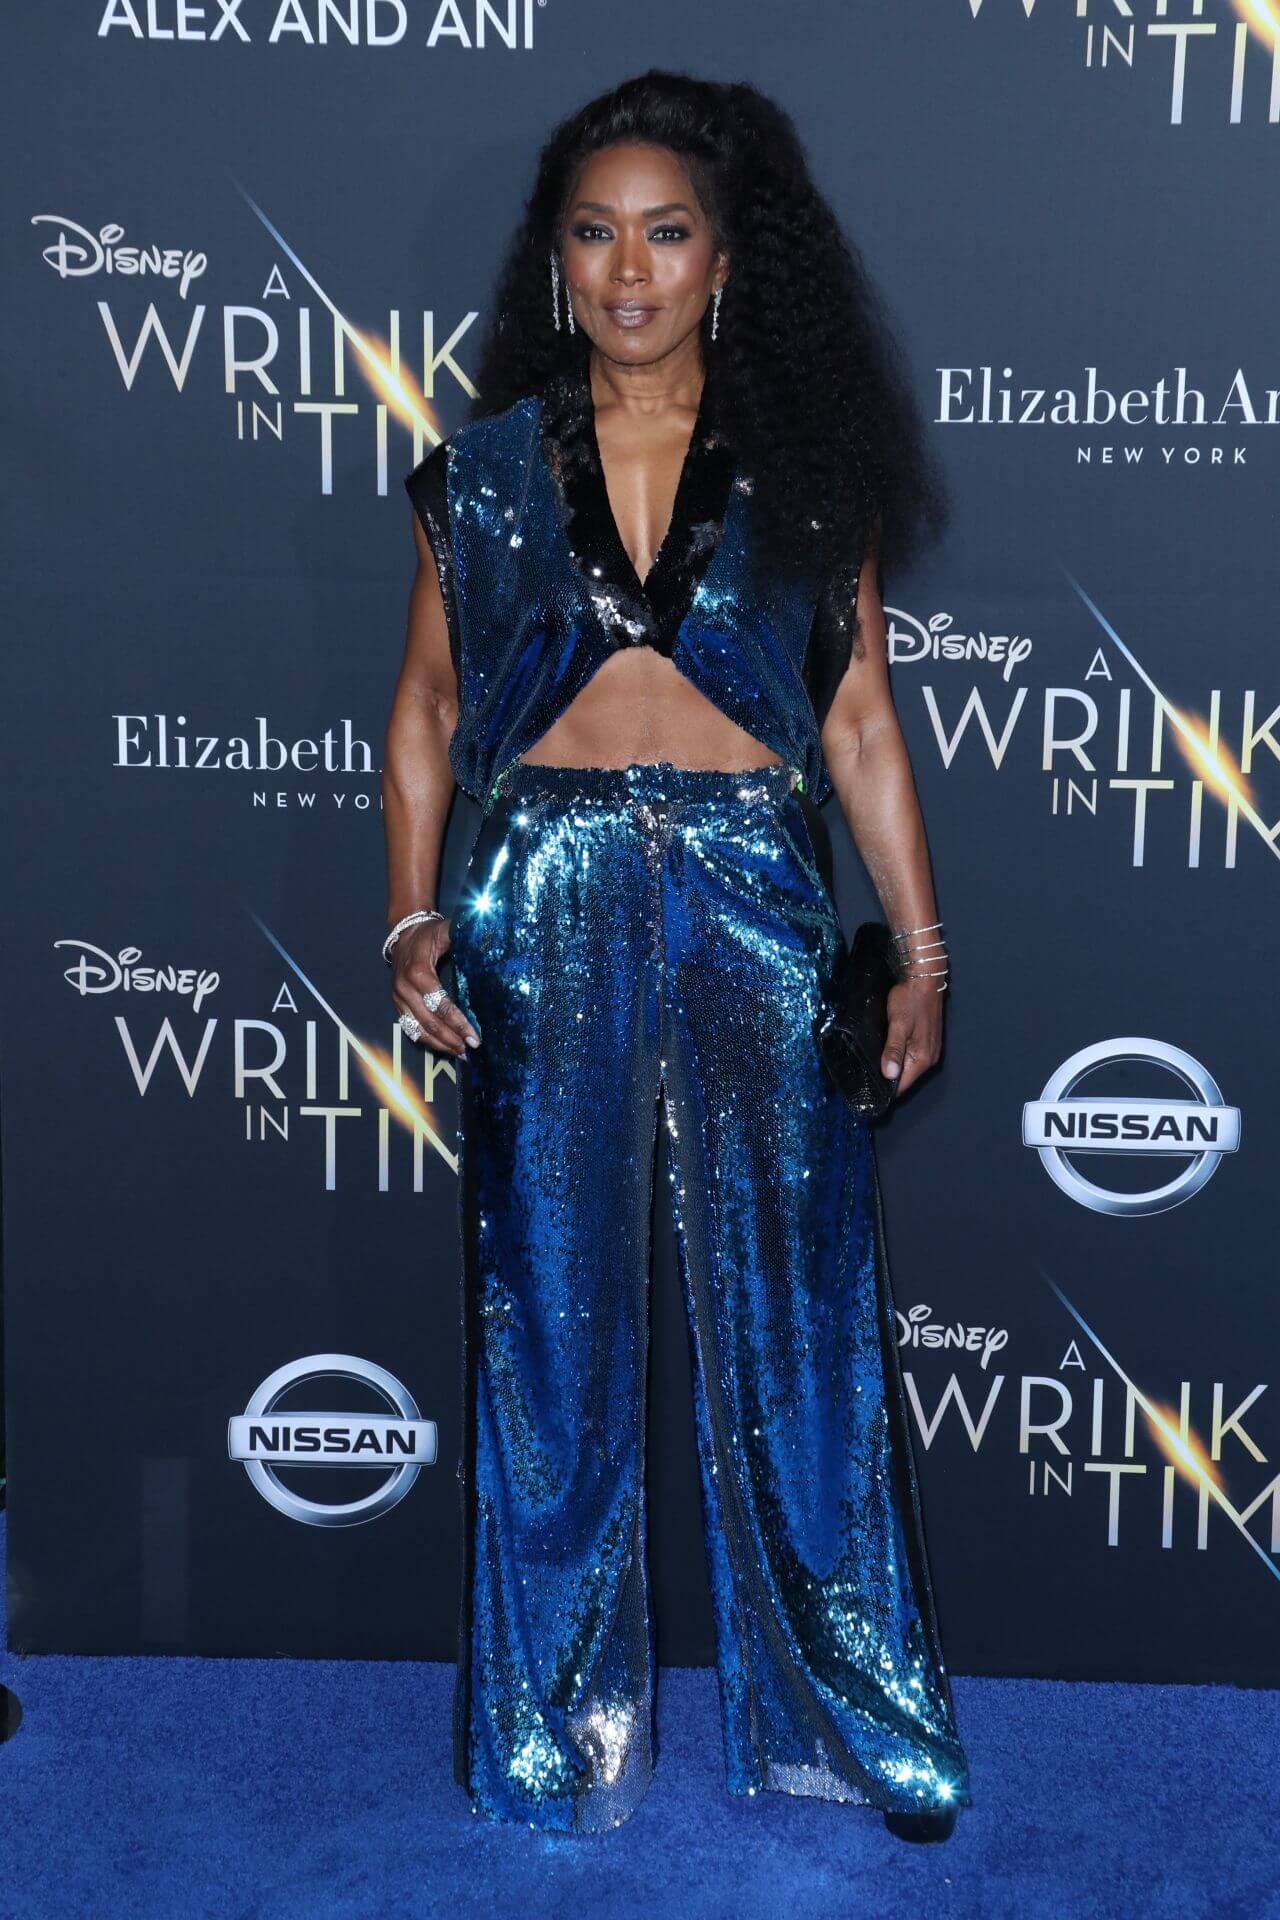 Angela Bassett In Blue Shimmery Crop Top With Long Flare Pants At“A Wrinkle in Time” Premiere in Los Angeles